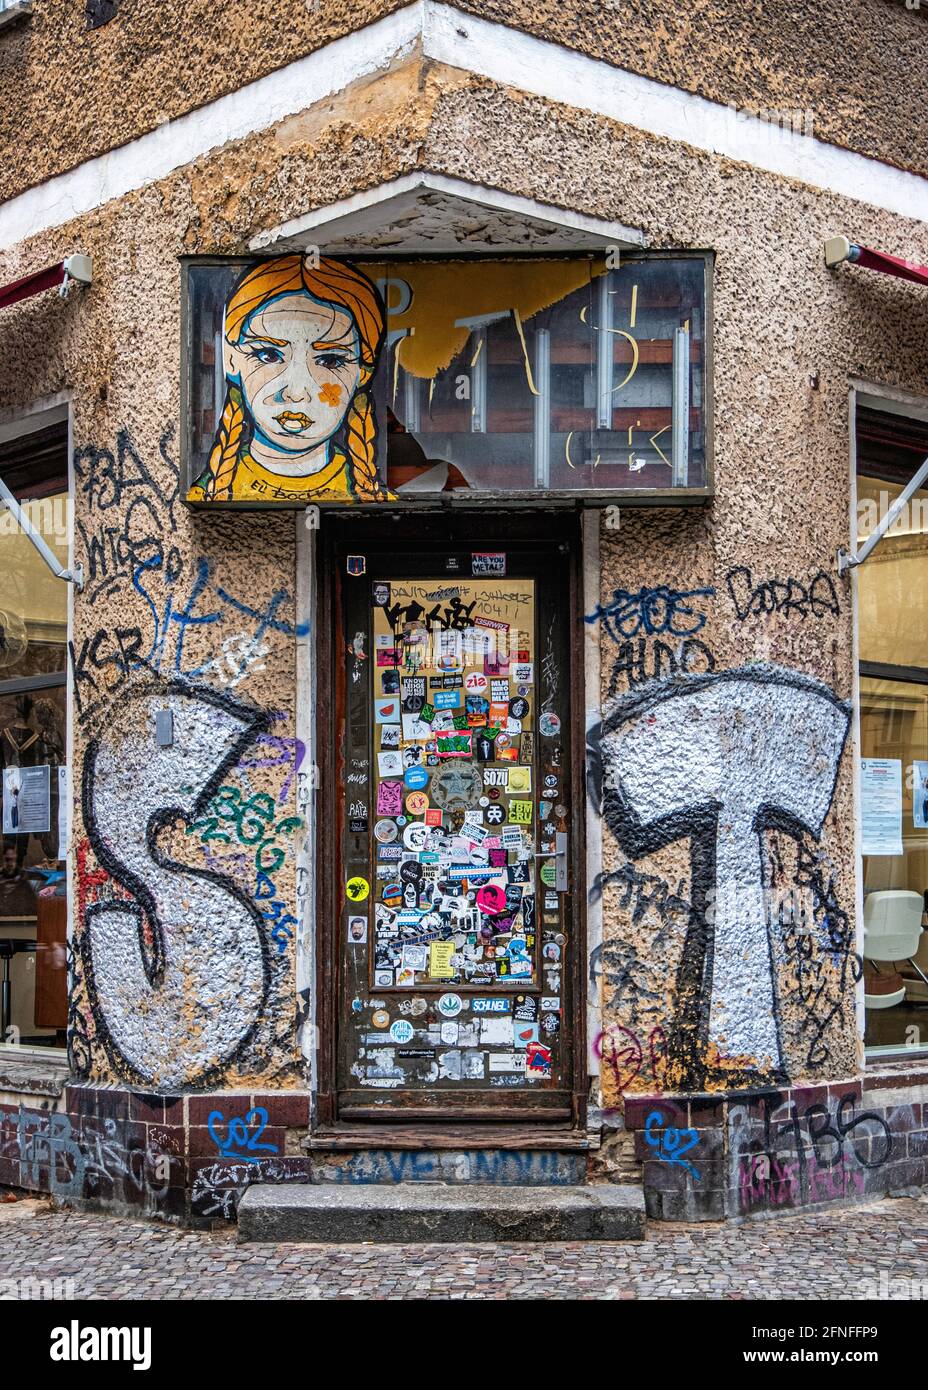 Graffiti covered building with El Bocho artwork and sticker covered ...